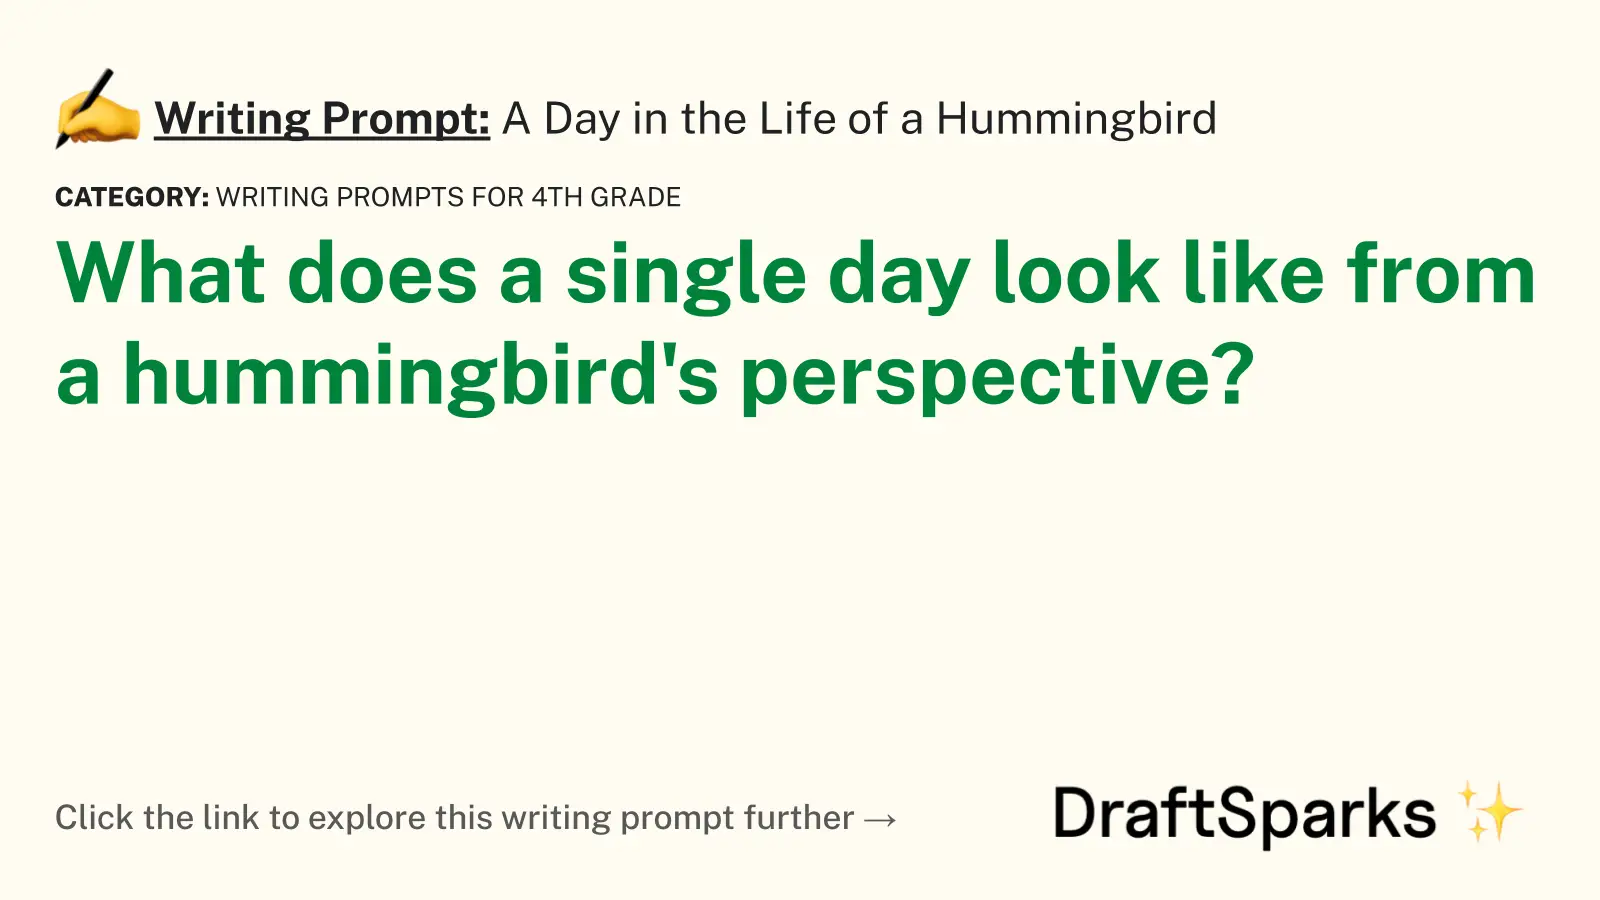 A Day in the Life of a Hummingbird